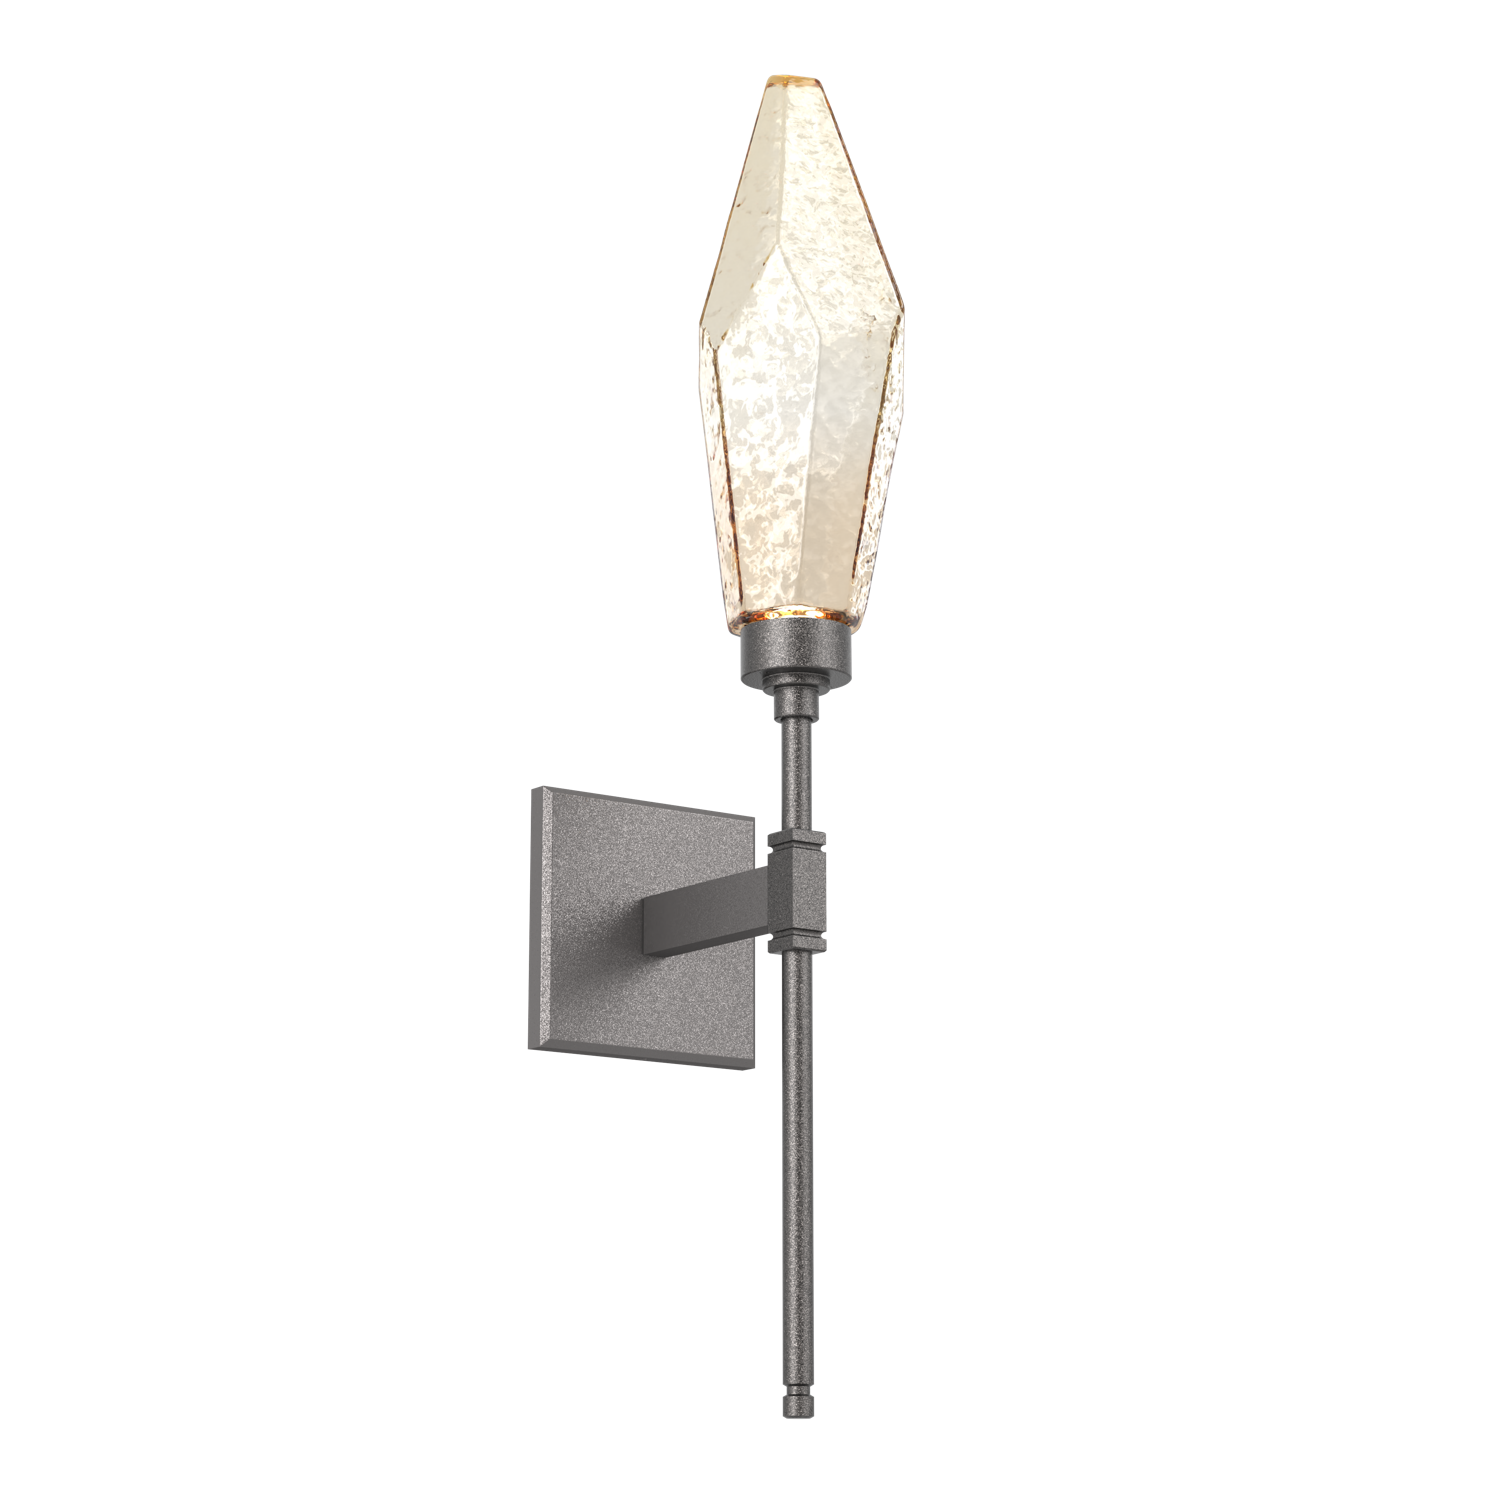 IDB0050-07-GP-CA-Hammerton-Studio-Rock-Crystal-belvedere-wall-sconce-with-graphite-finish-and-chilled-amber-blown-glass-shades-and-LED-lamping